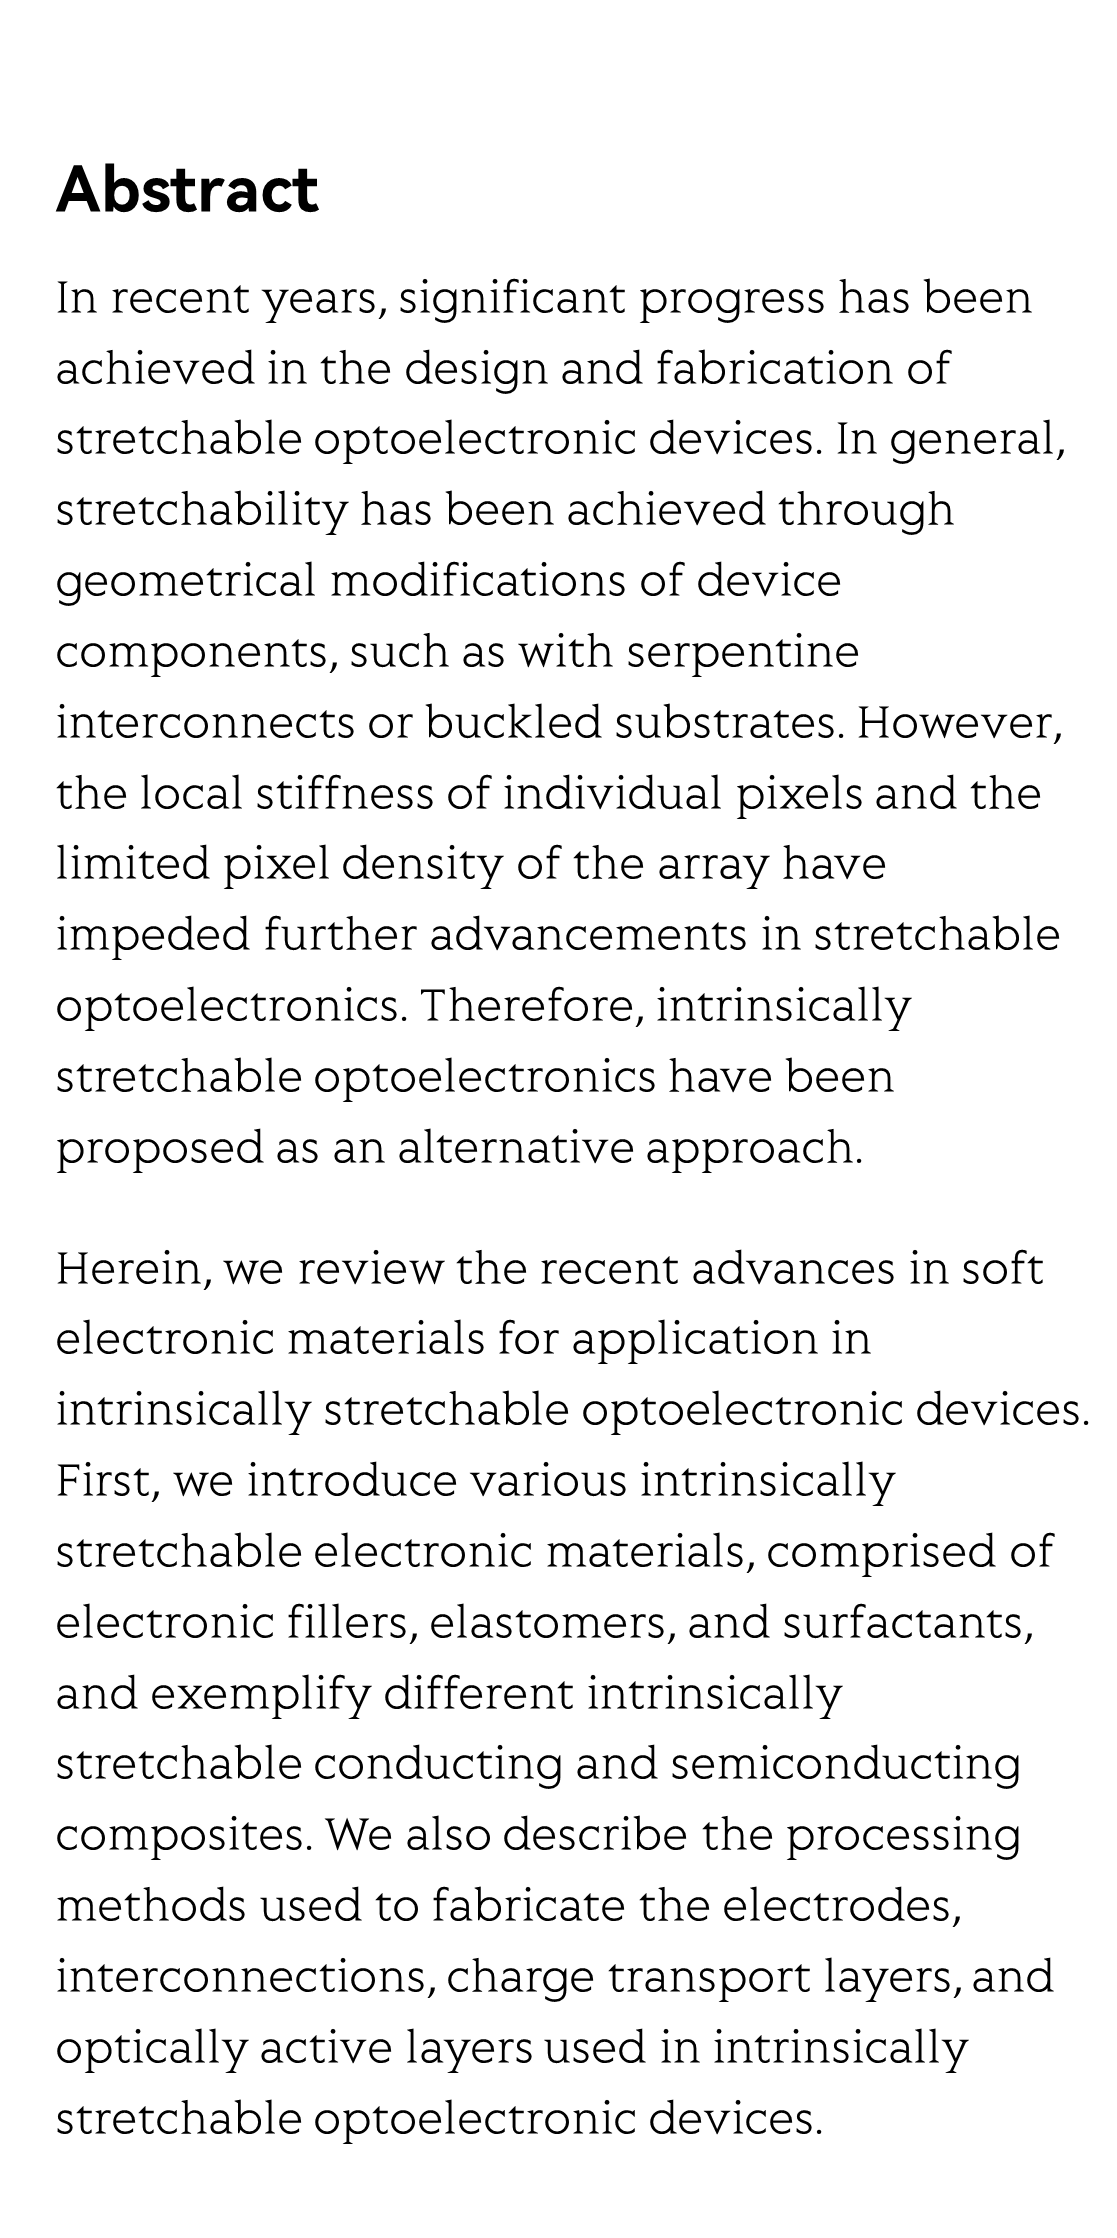 Recent advances in soft electronic materials for intrinsically stretchable optoelectronic systems_2